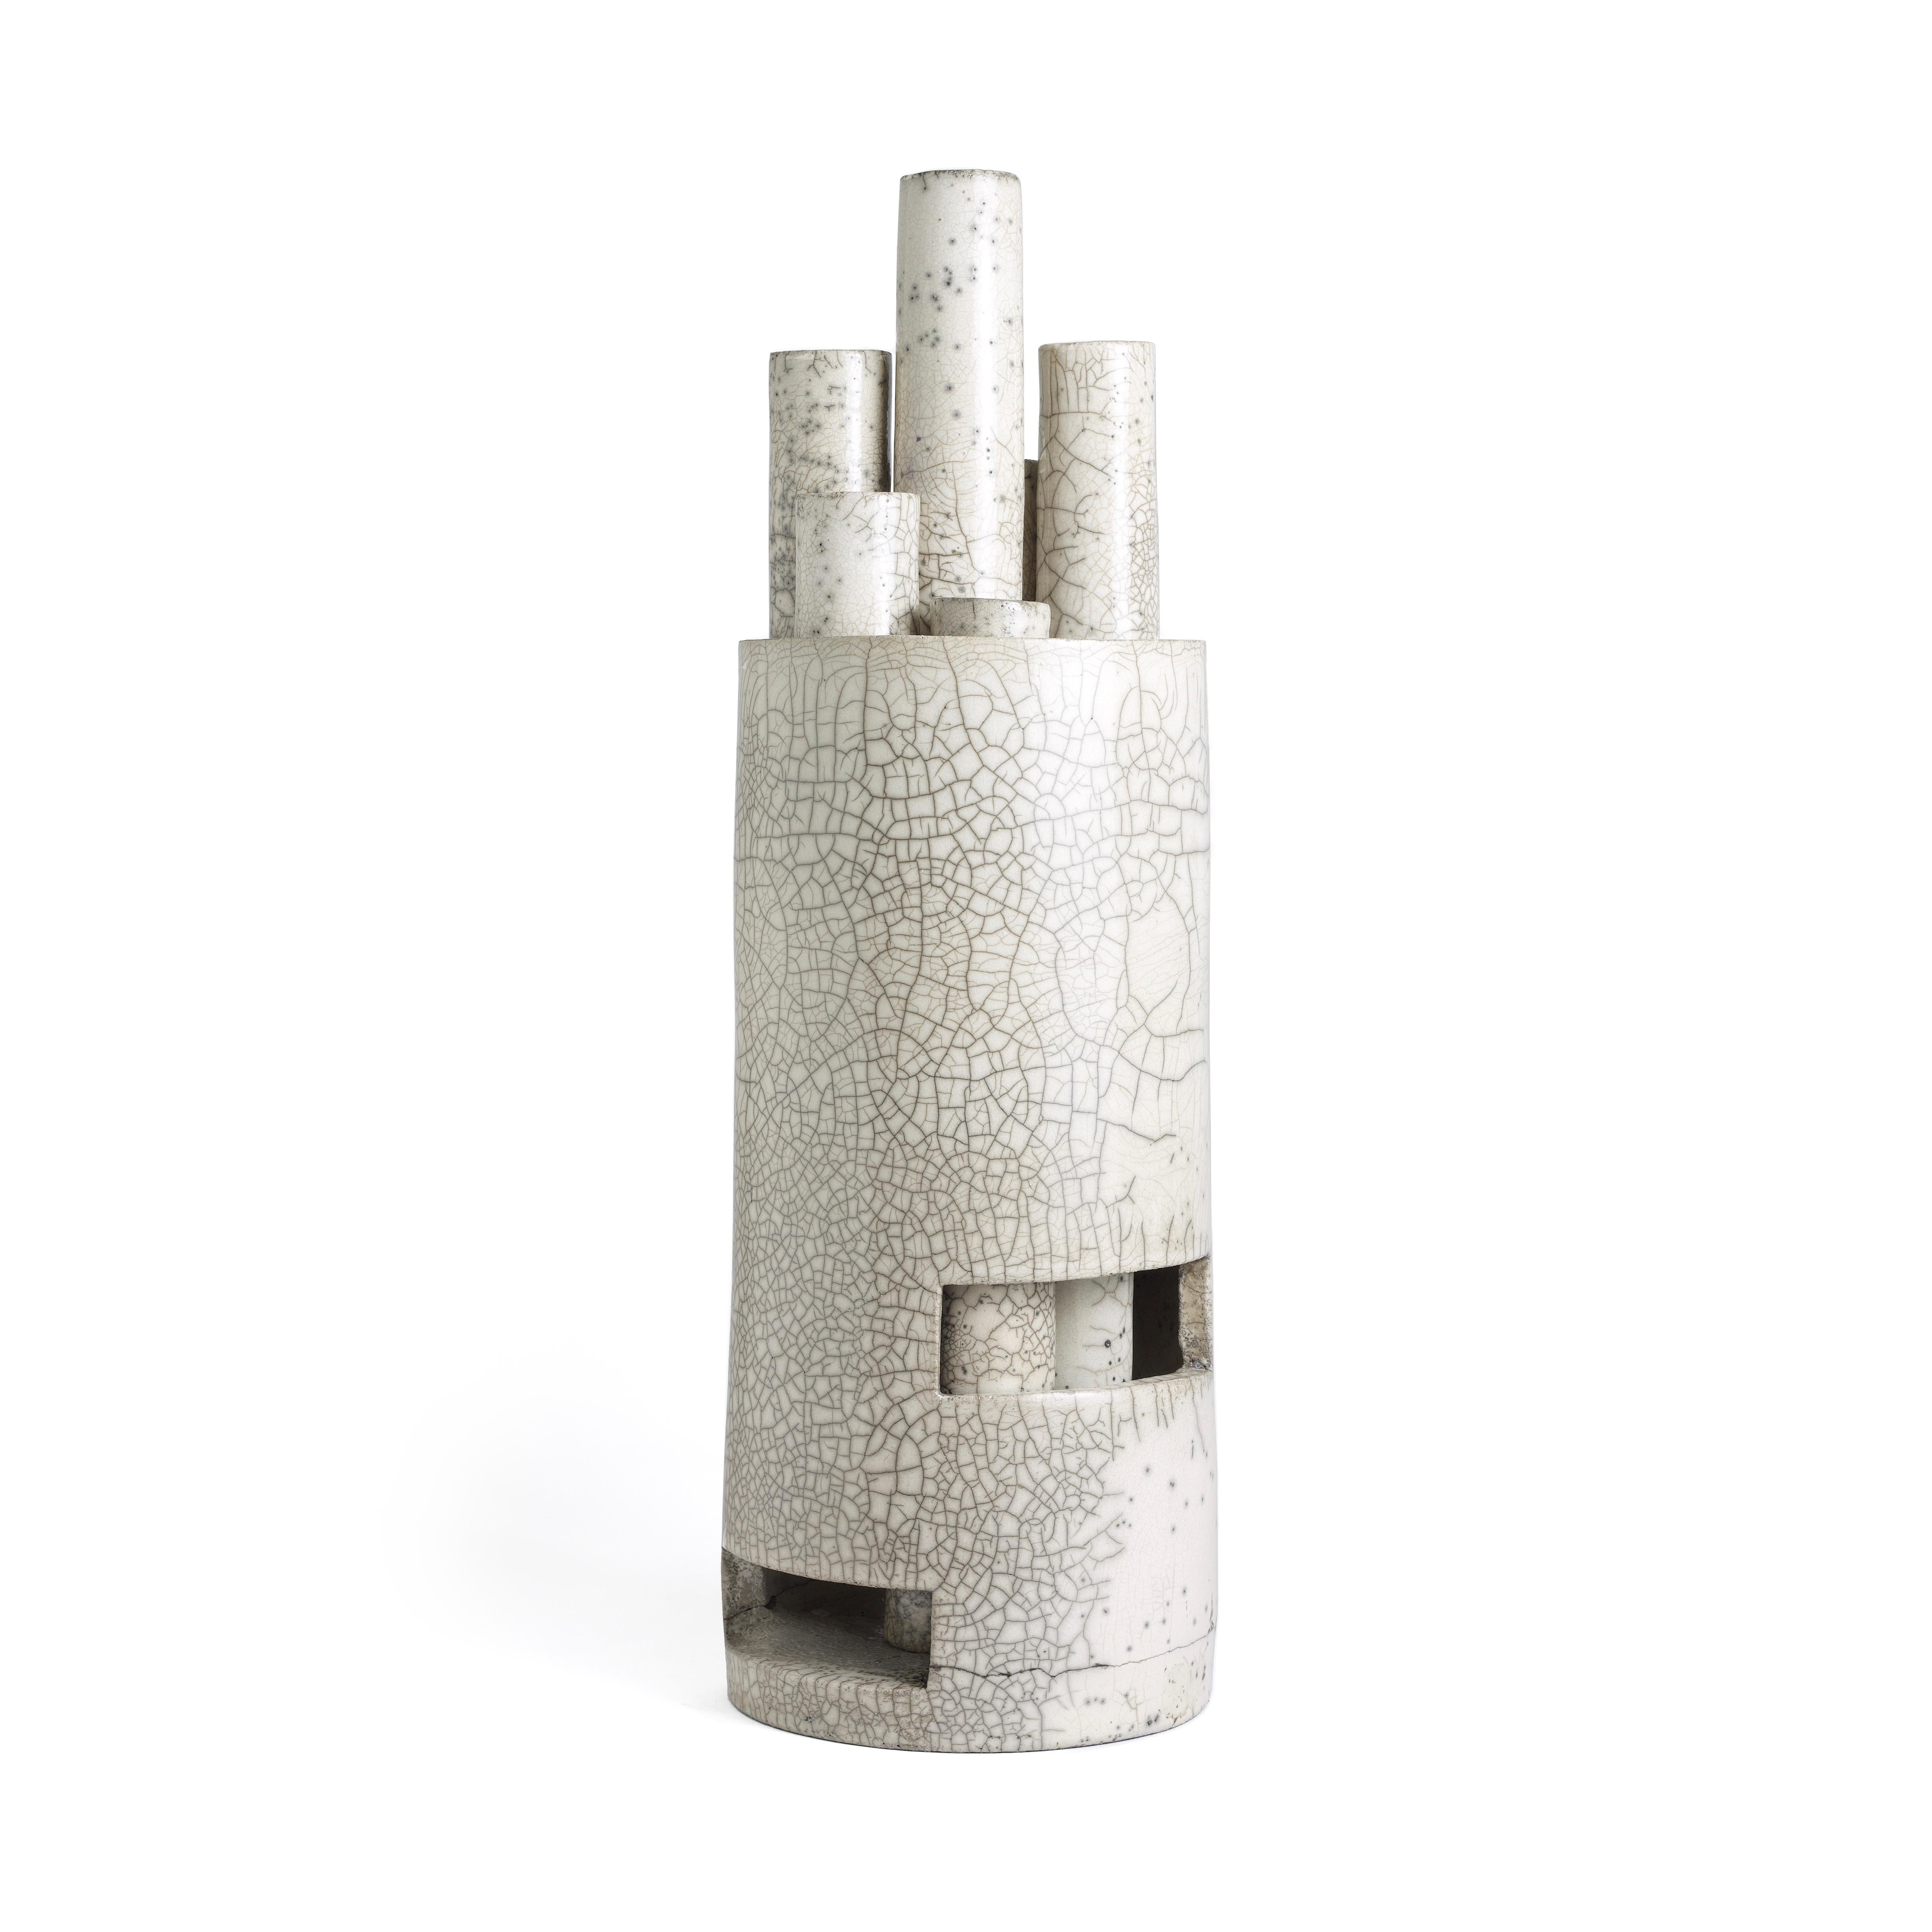 Metropolis sculptures represent civilization at different stages, starting from contained elements of smaller dimensions getting taller. The cracklè exalt the geometric shapes of these candle holders, result of the Japanese Firing technique. This